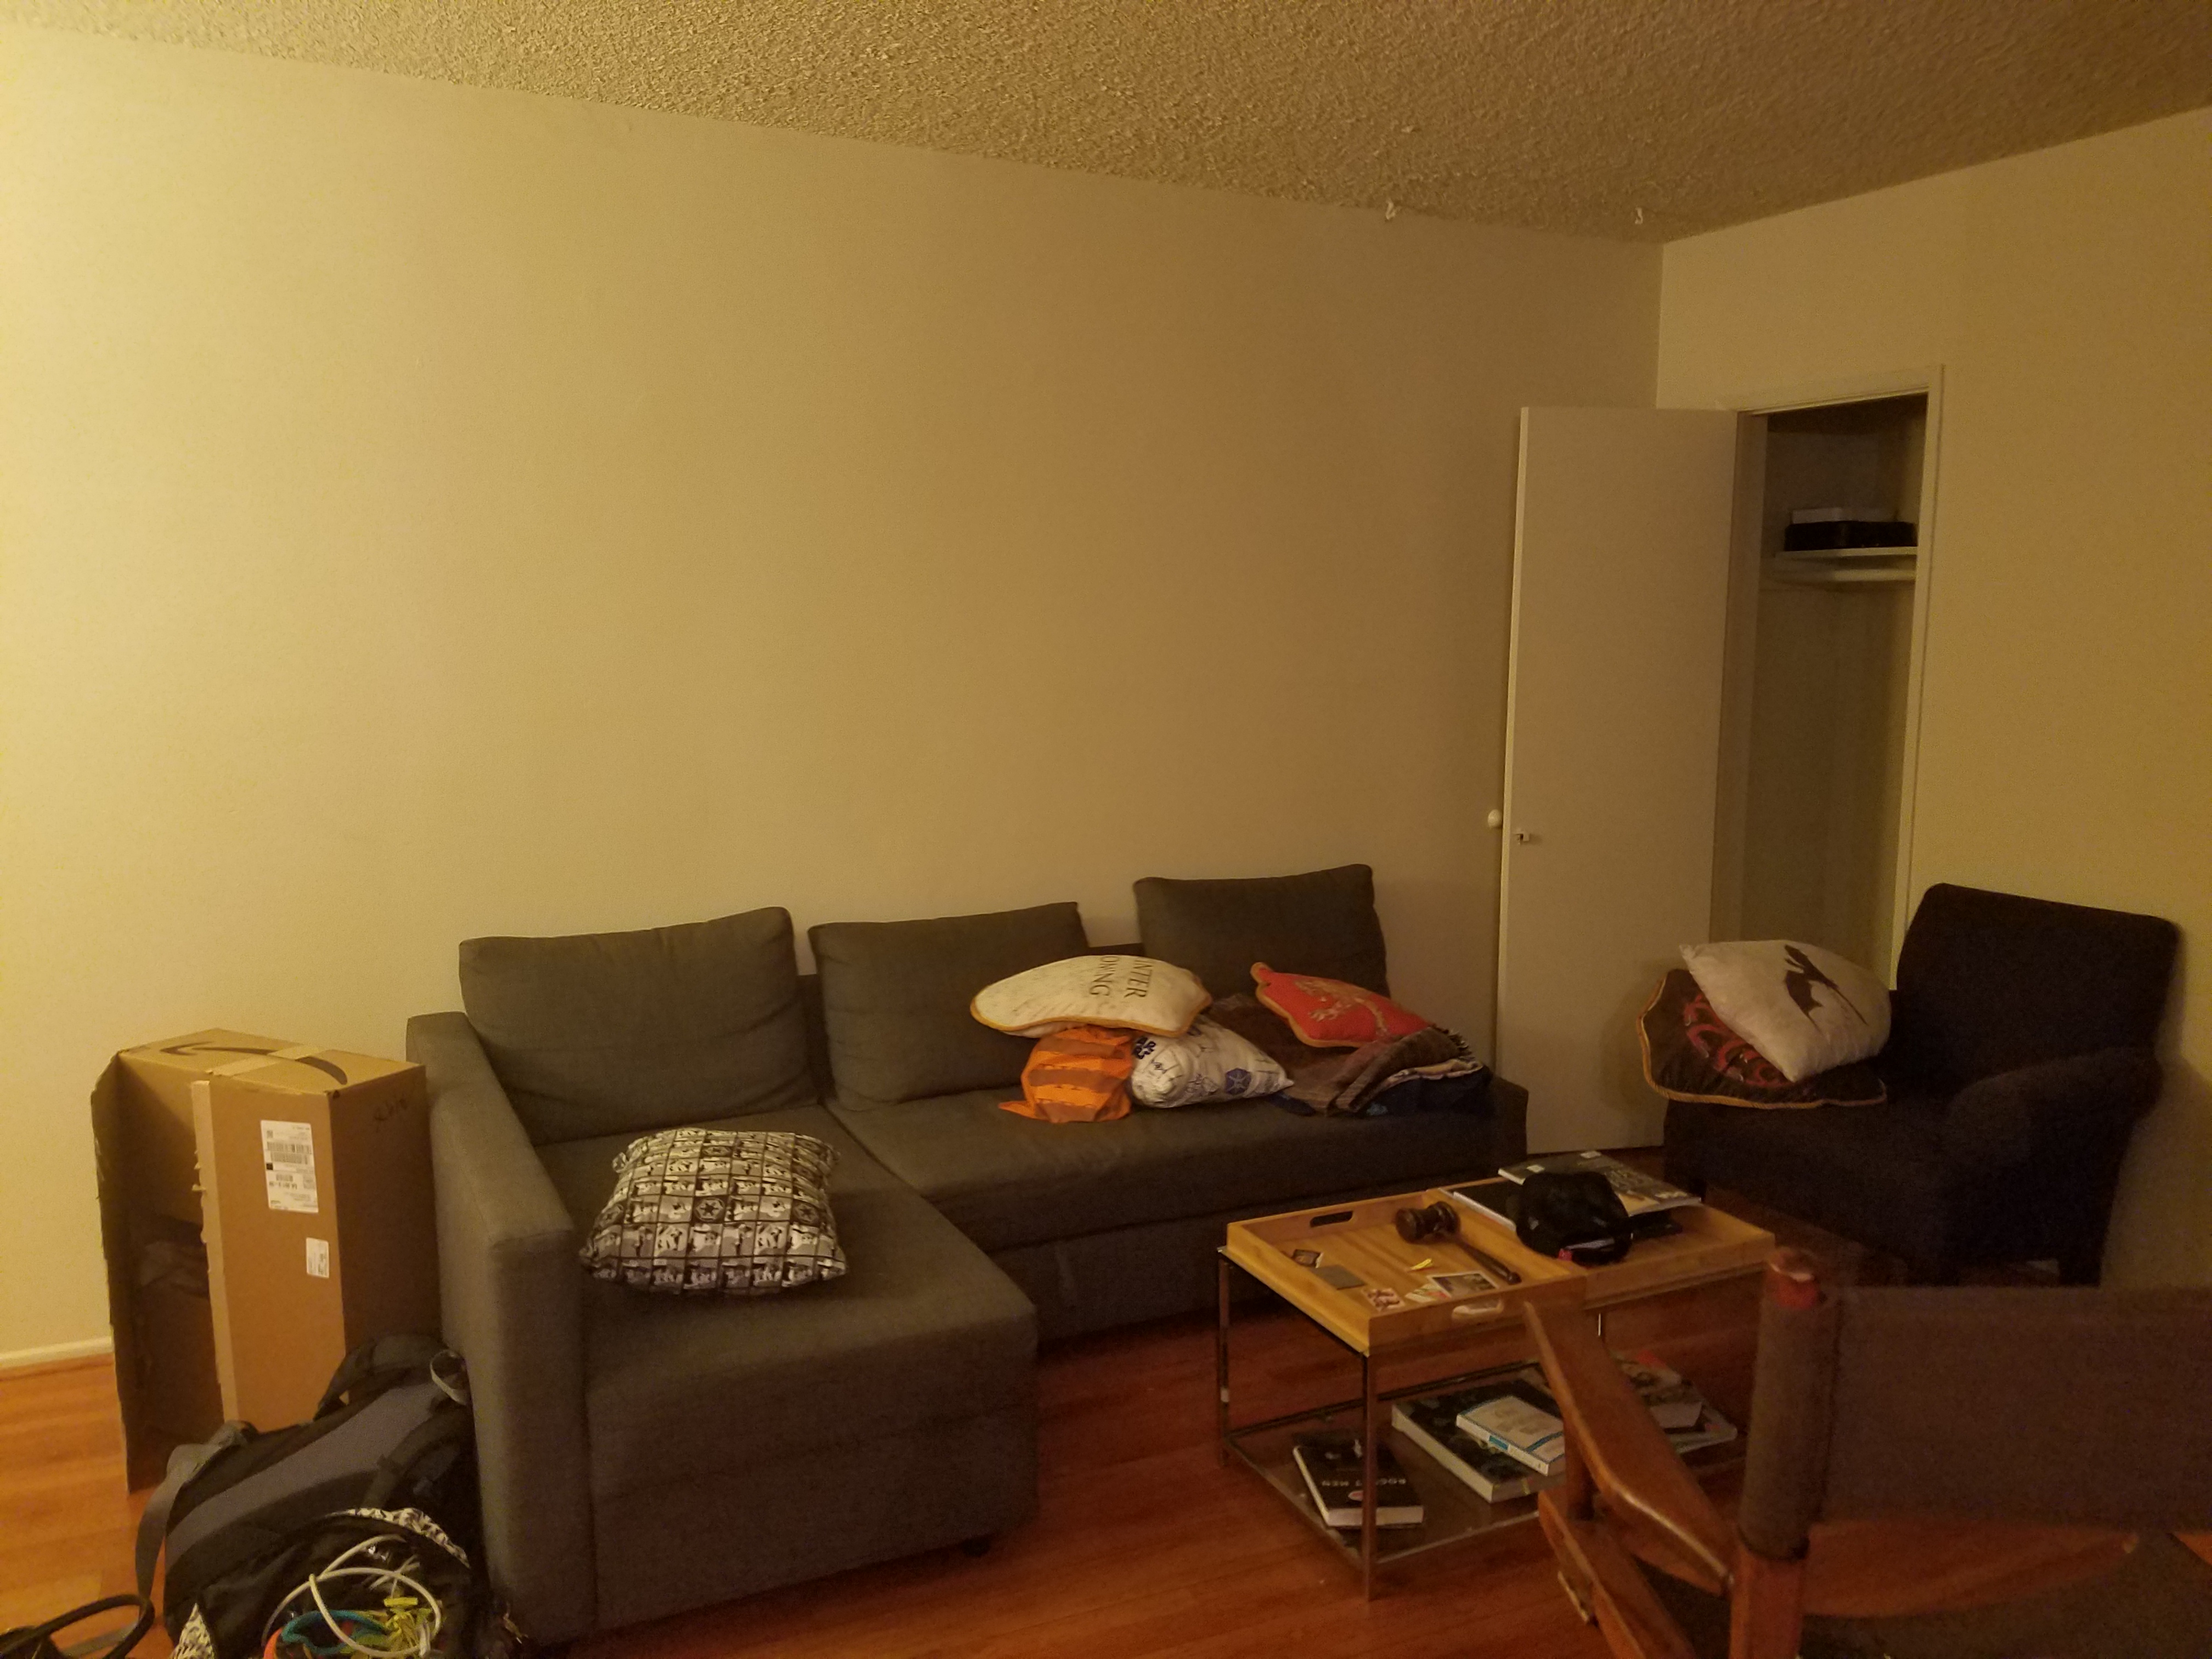 A living room in a new apartment. 